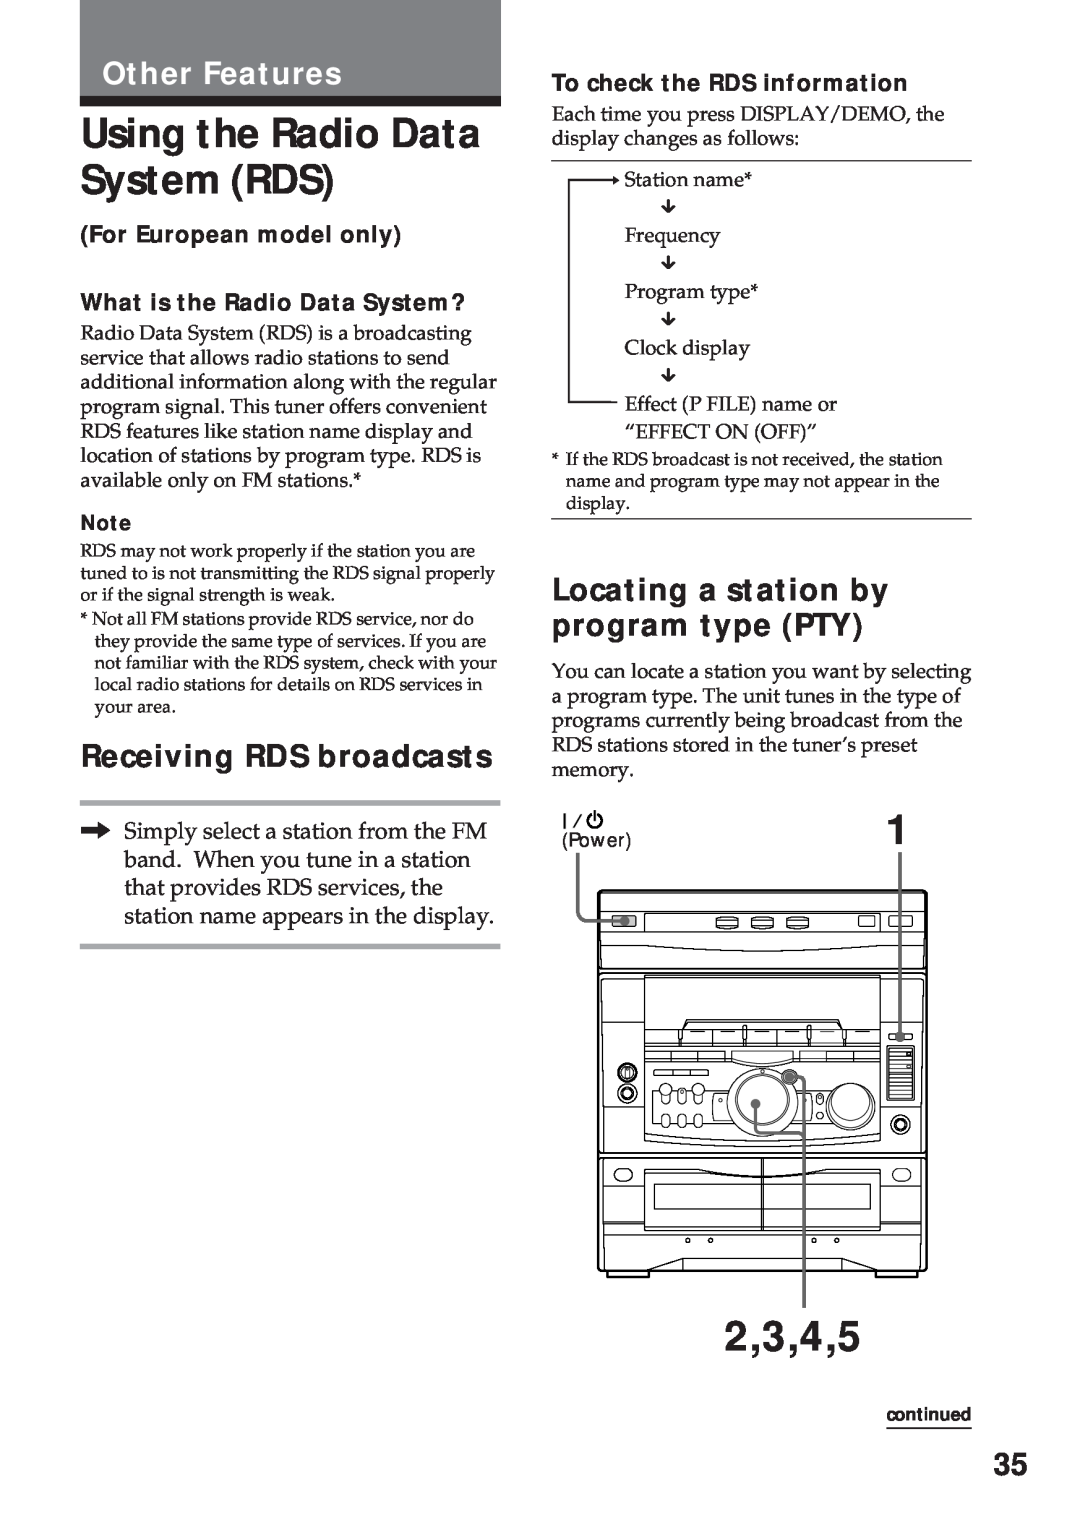 Sony MHC-GRX5 Using the Radio Data System RDS, 2,3,4,5, Other Features, Receiving RDS broadcasts, For European model only 